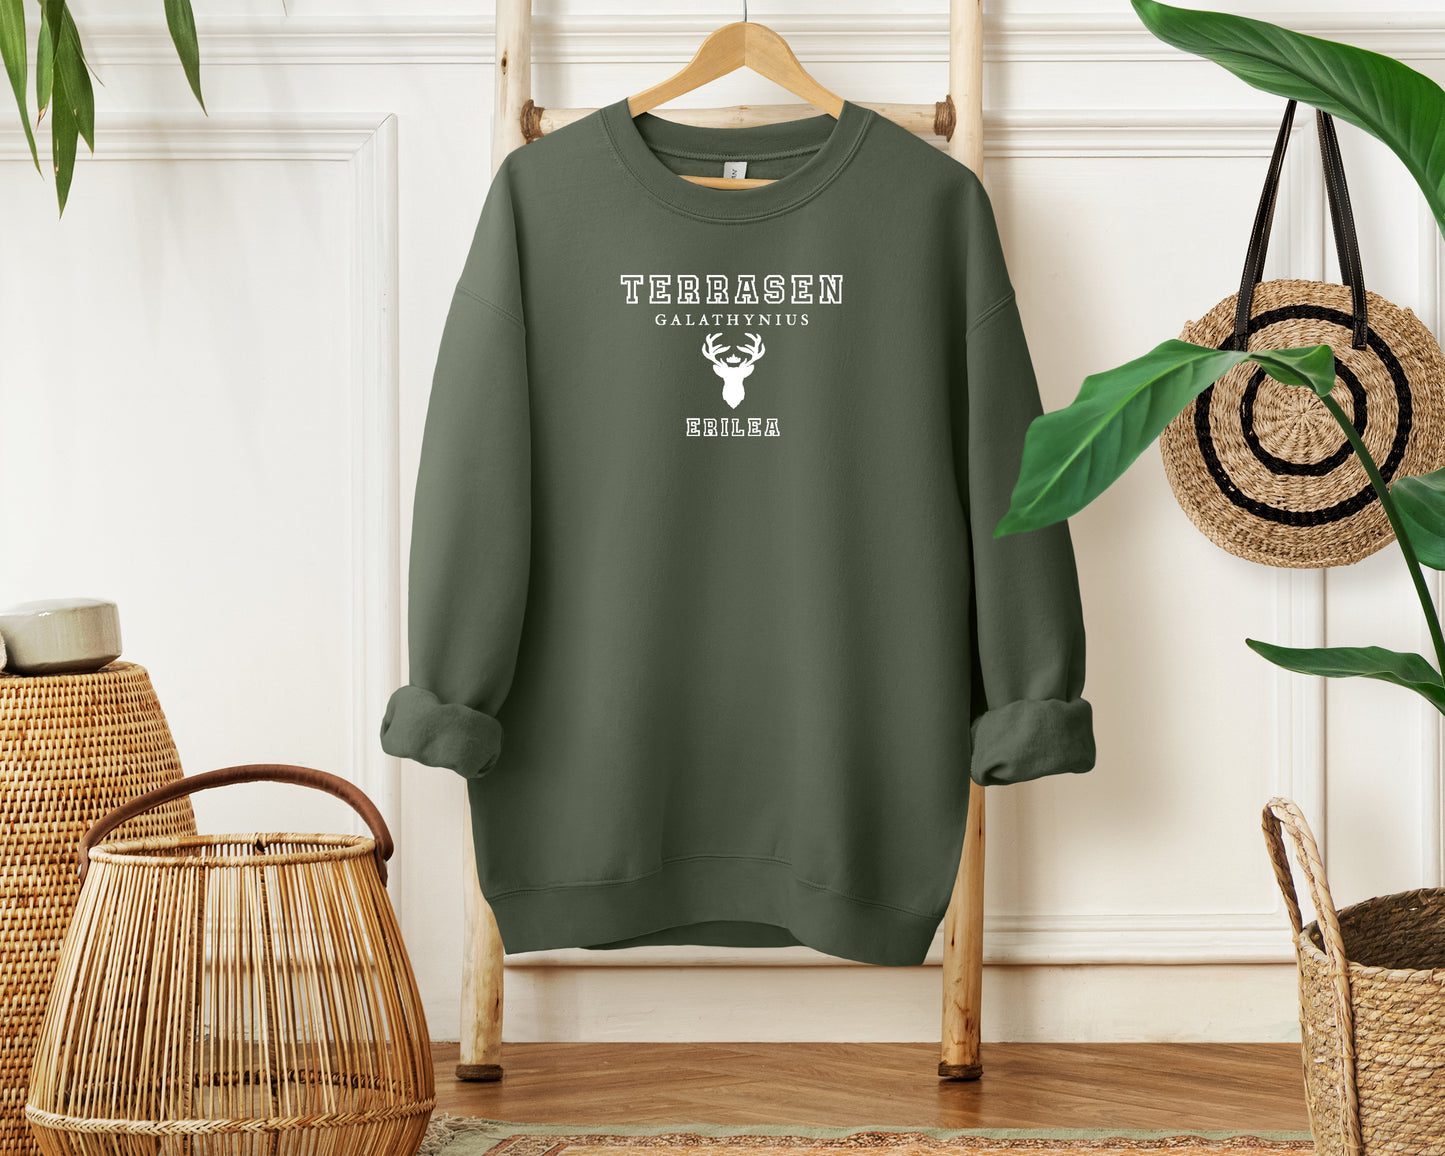 Embroidered Terrasen Unisex Sweatshirt With White Lettering